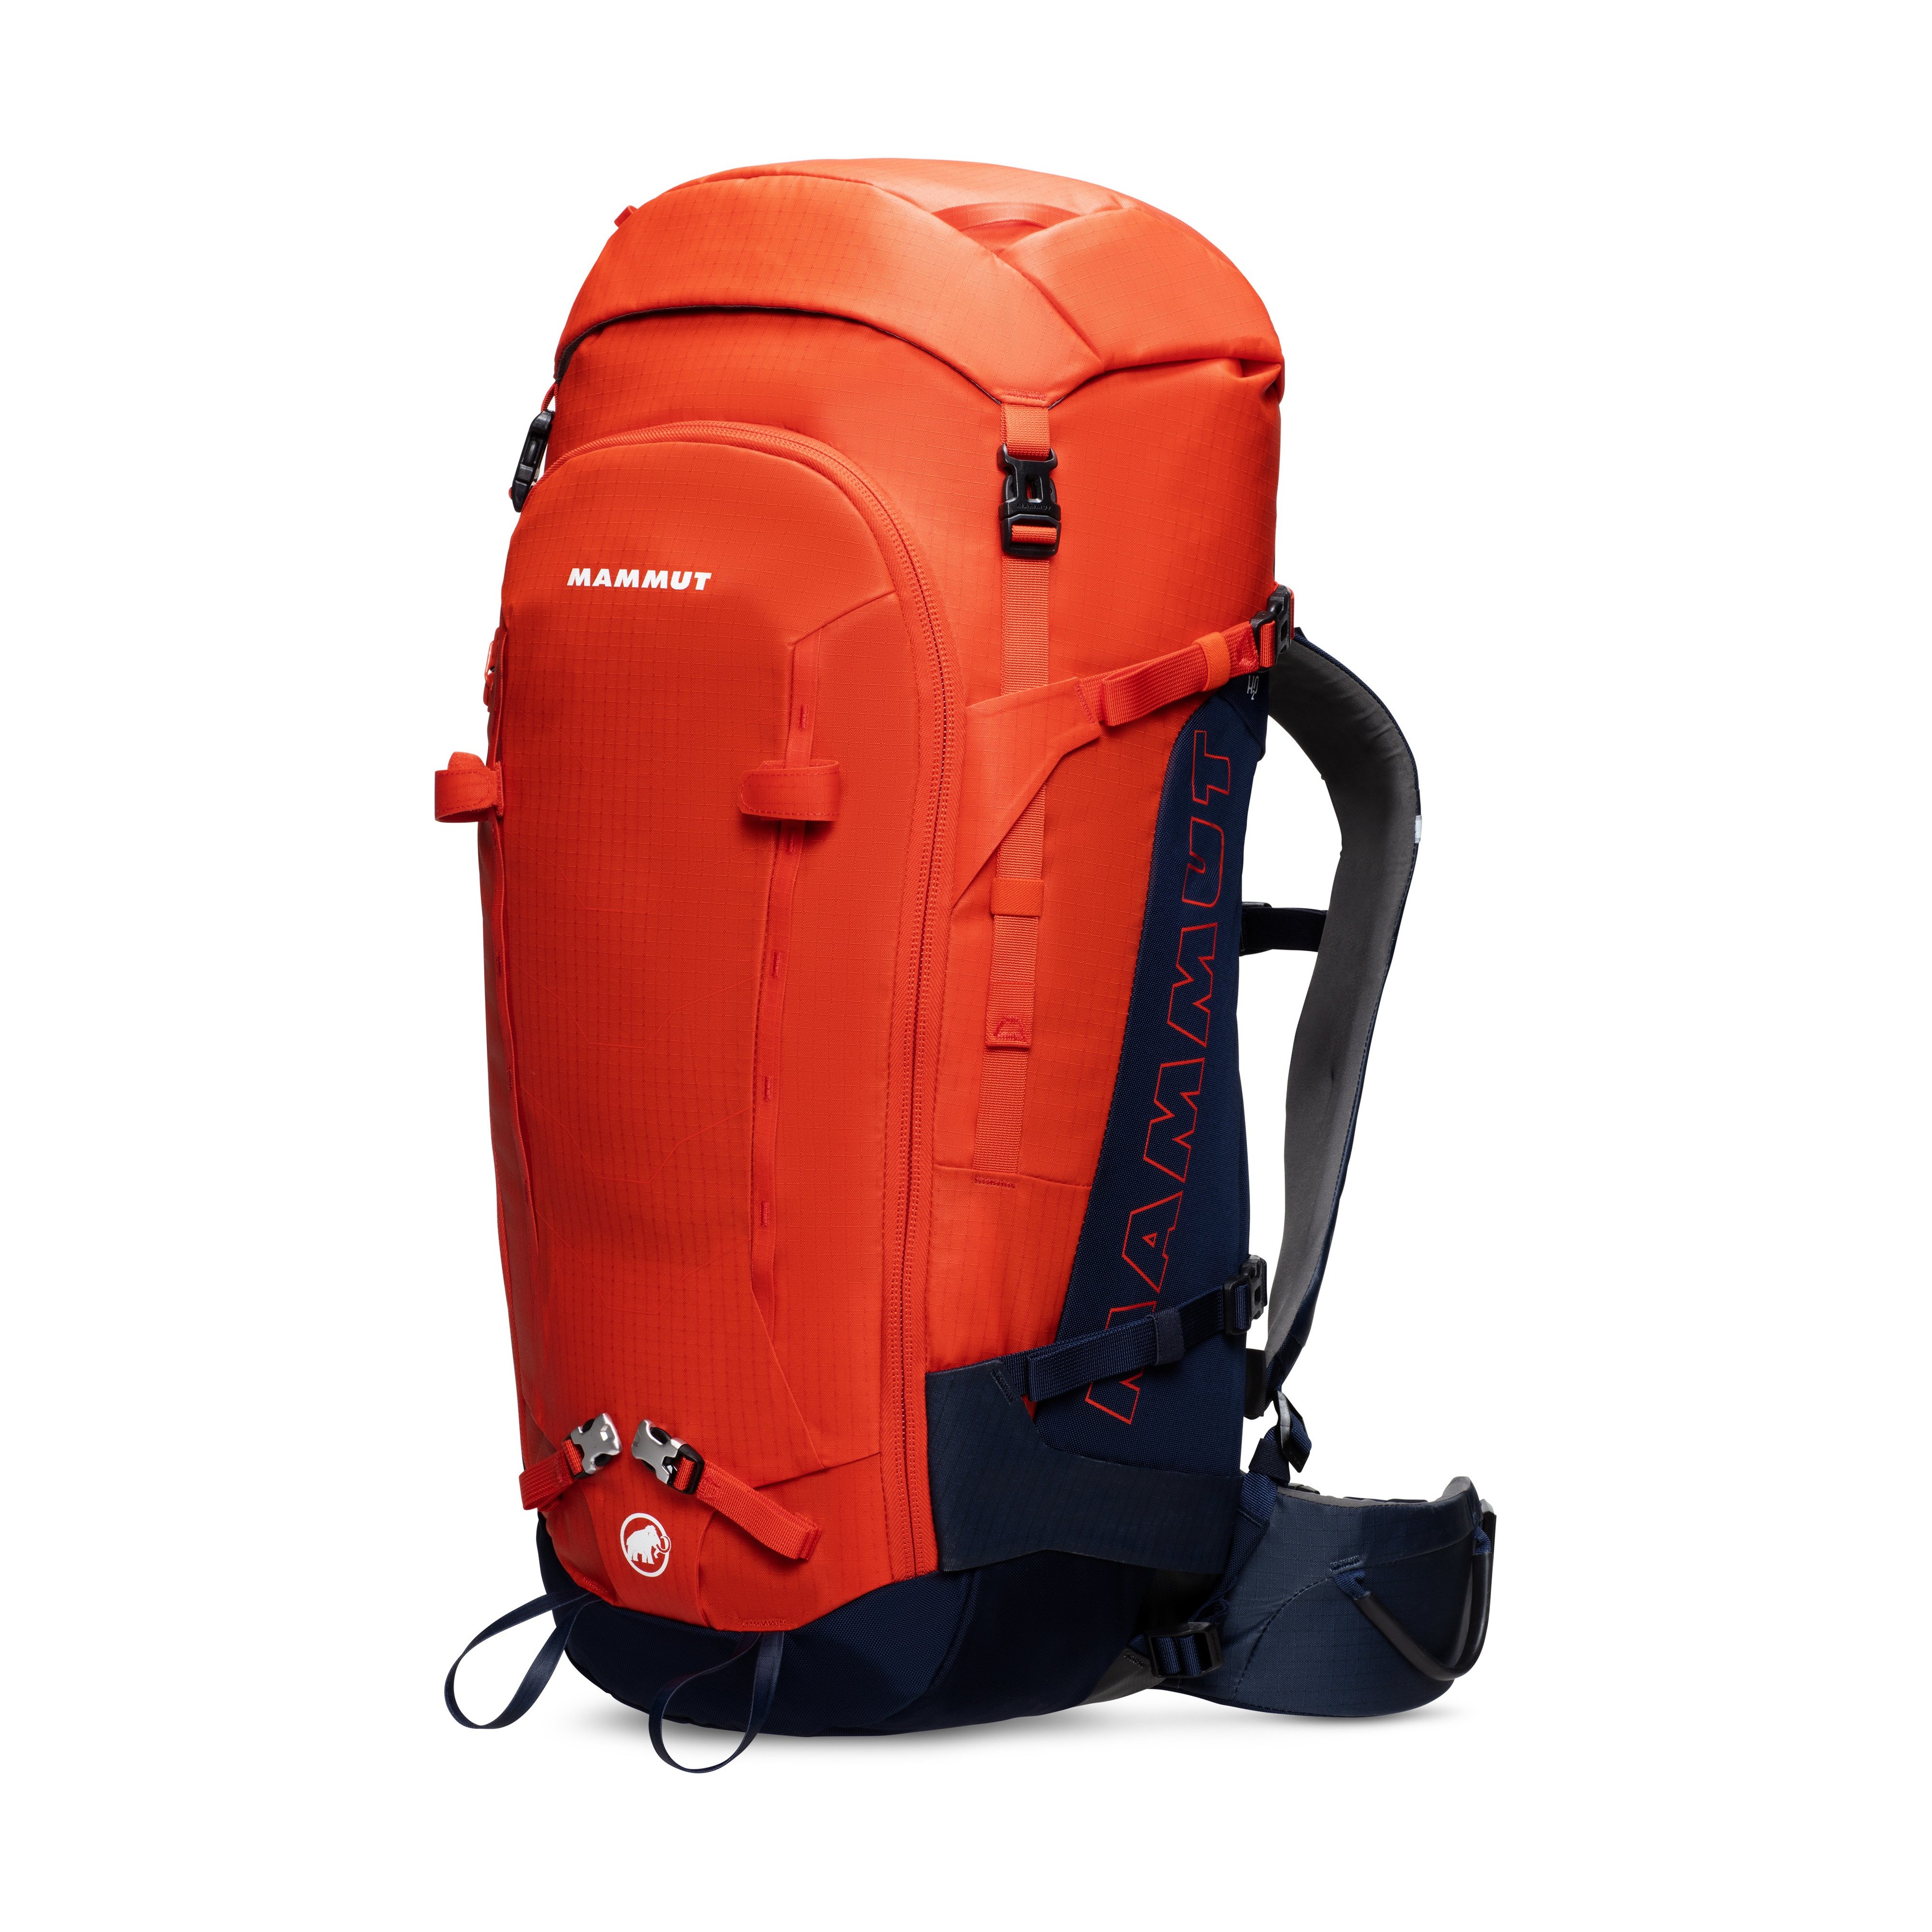 Trion Spine 50 - hot red-marine, 50 L product image